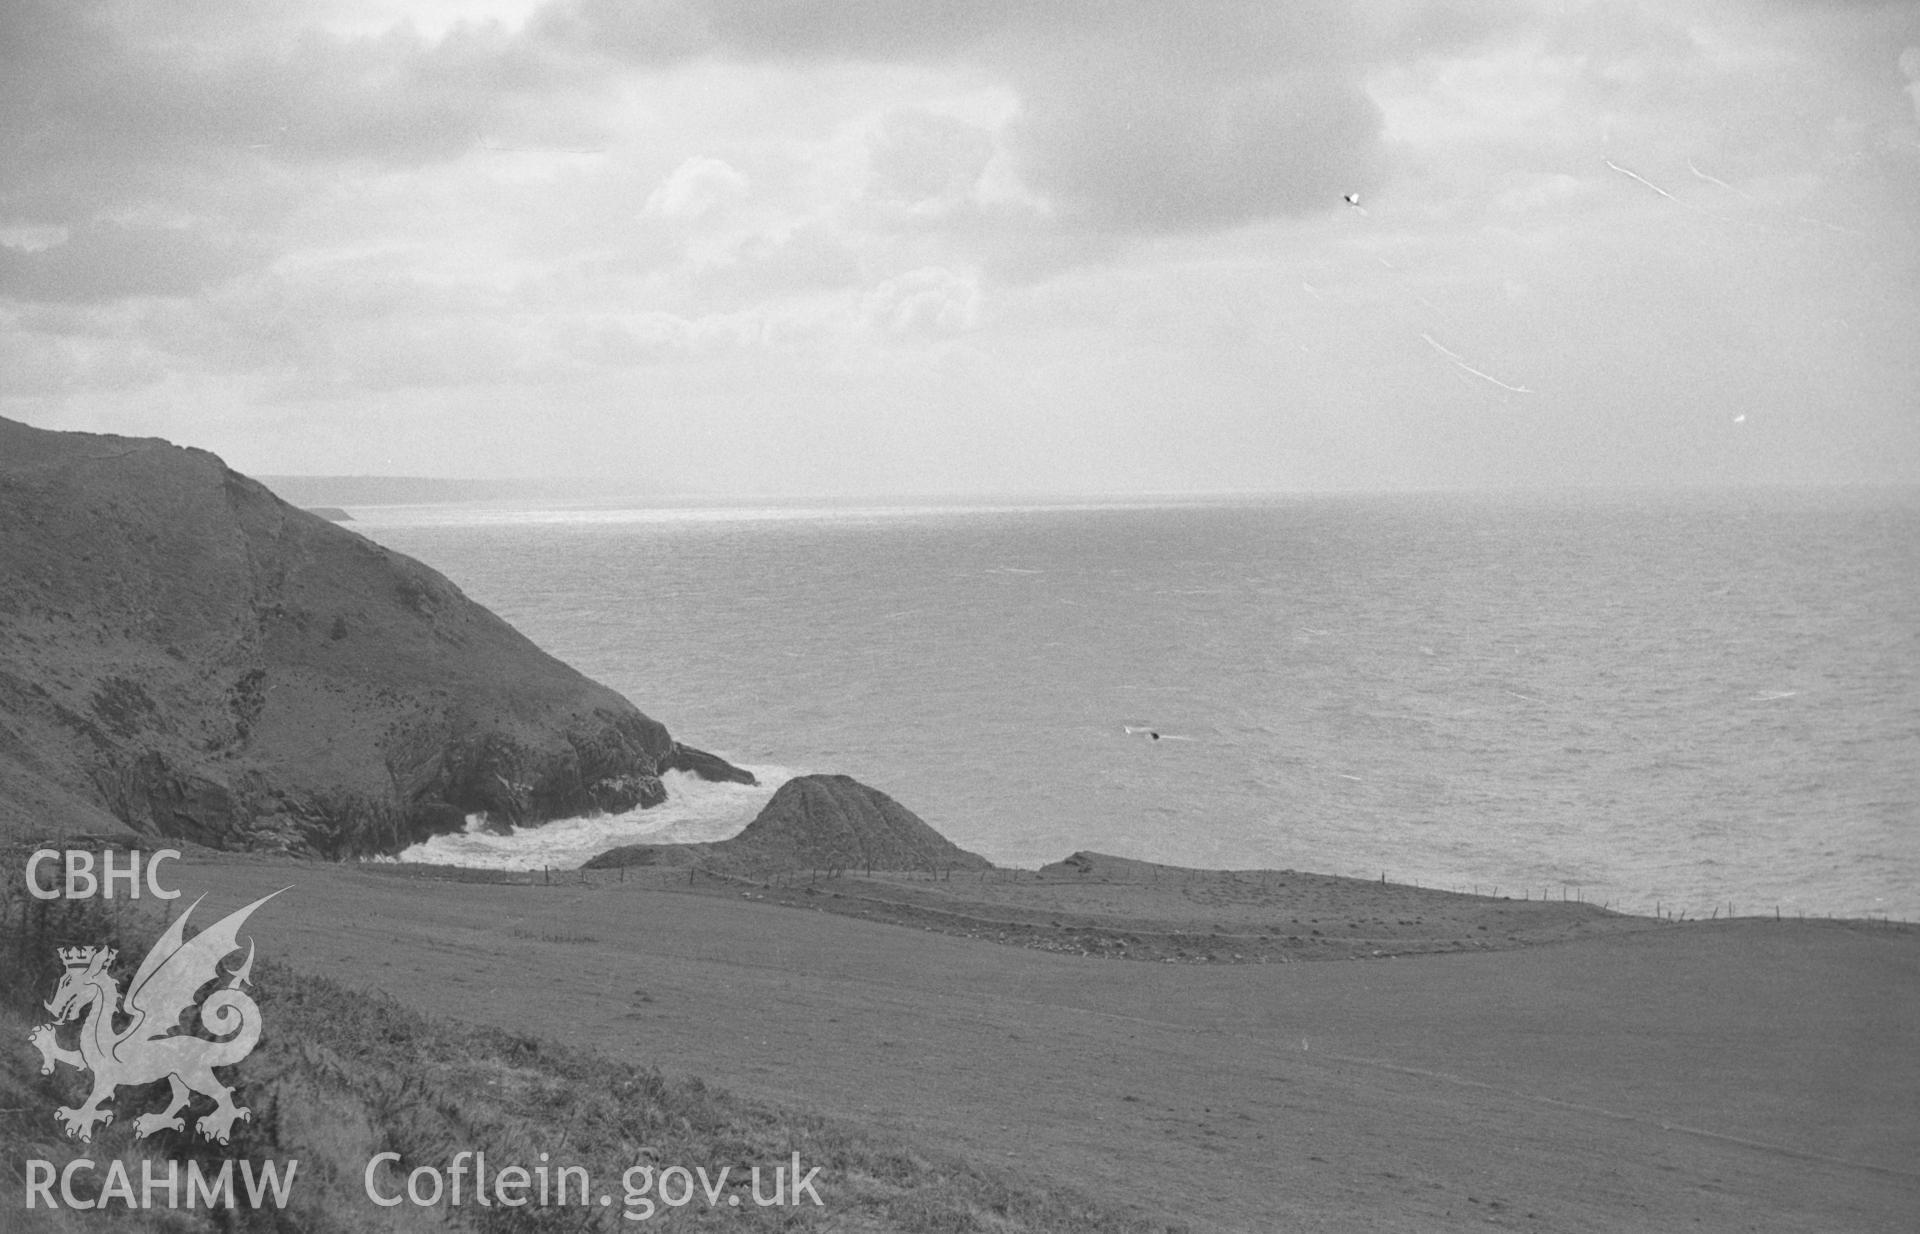 Digital copy of a black and white negative showing view looking across outer ramparts to the inner ramparts of Castell Bach promontory fort. Photographed by Arthur O. Chater in April 1966 looking west south west from Grid Reference SN 362 582.